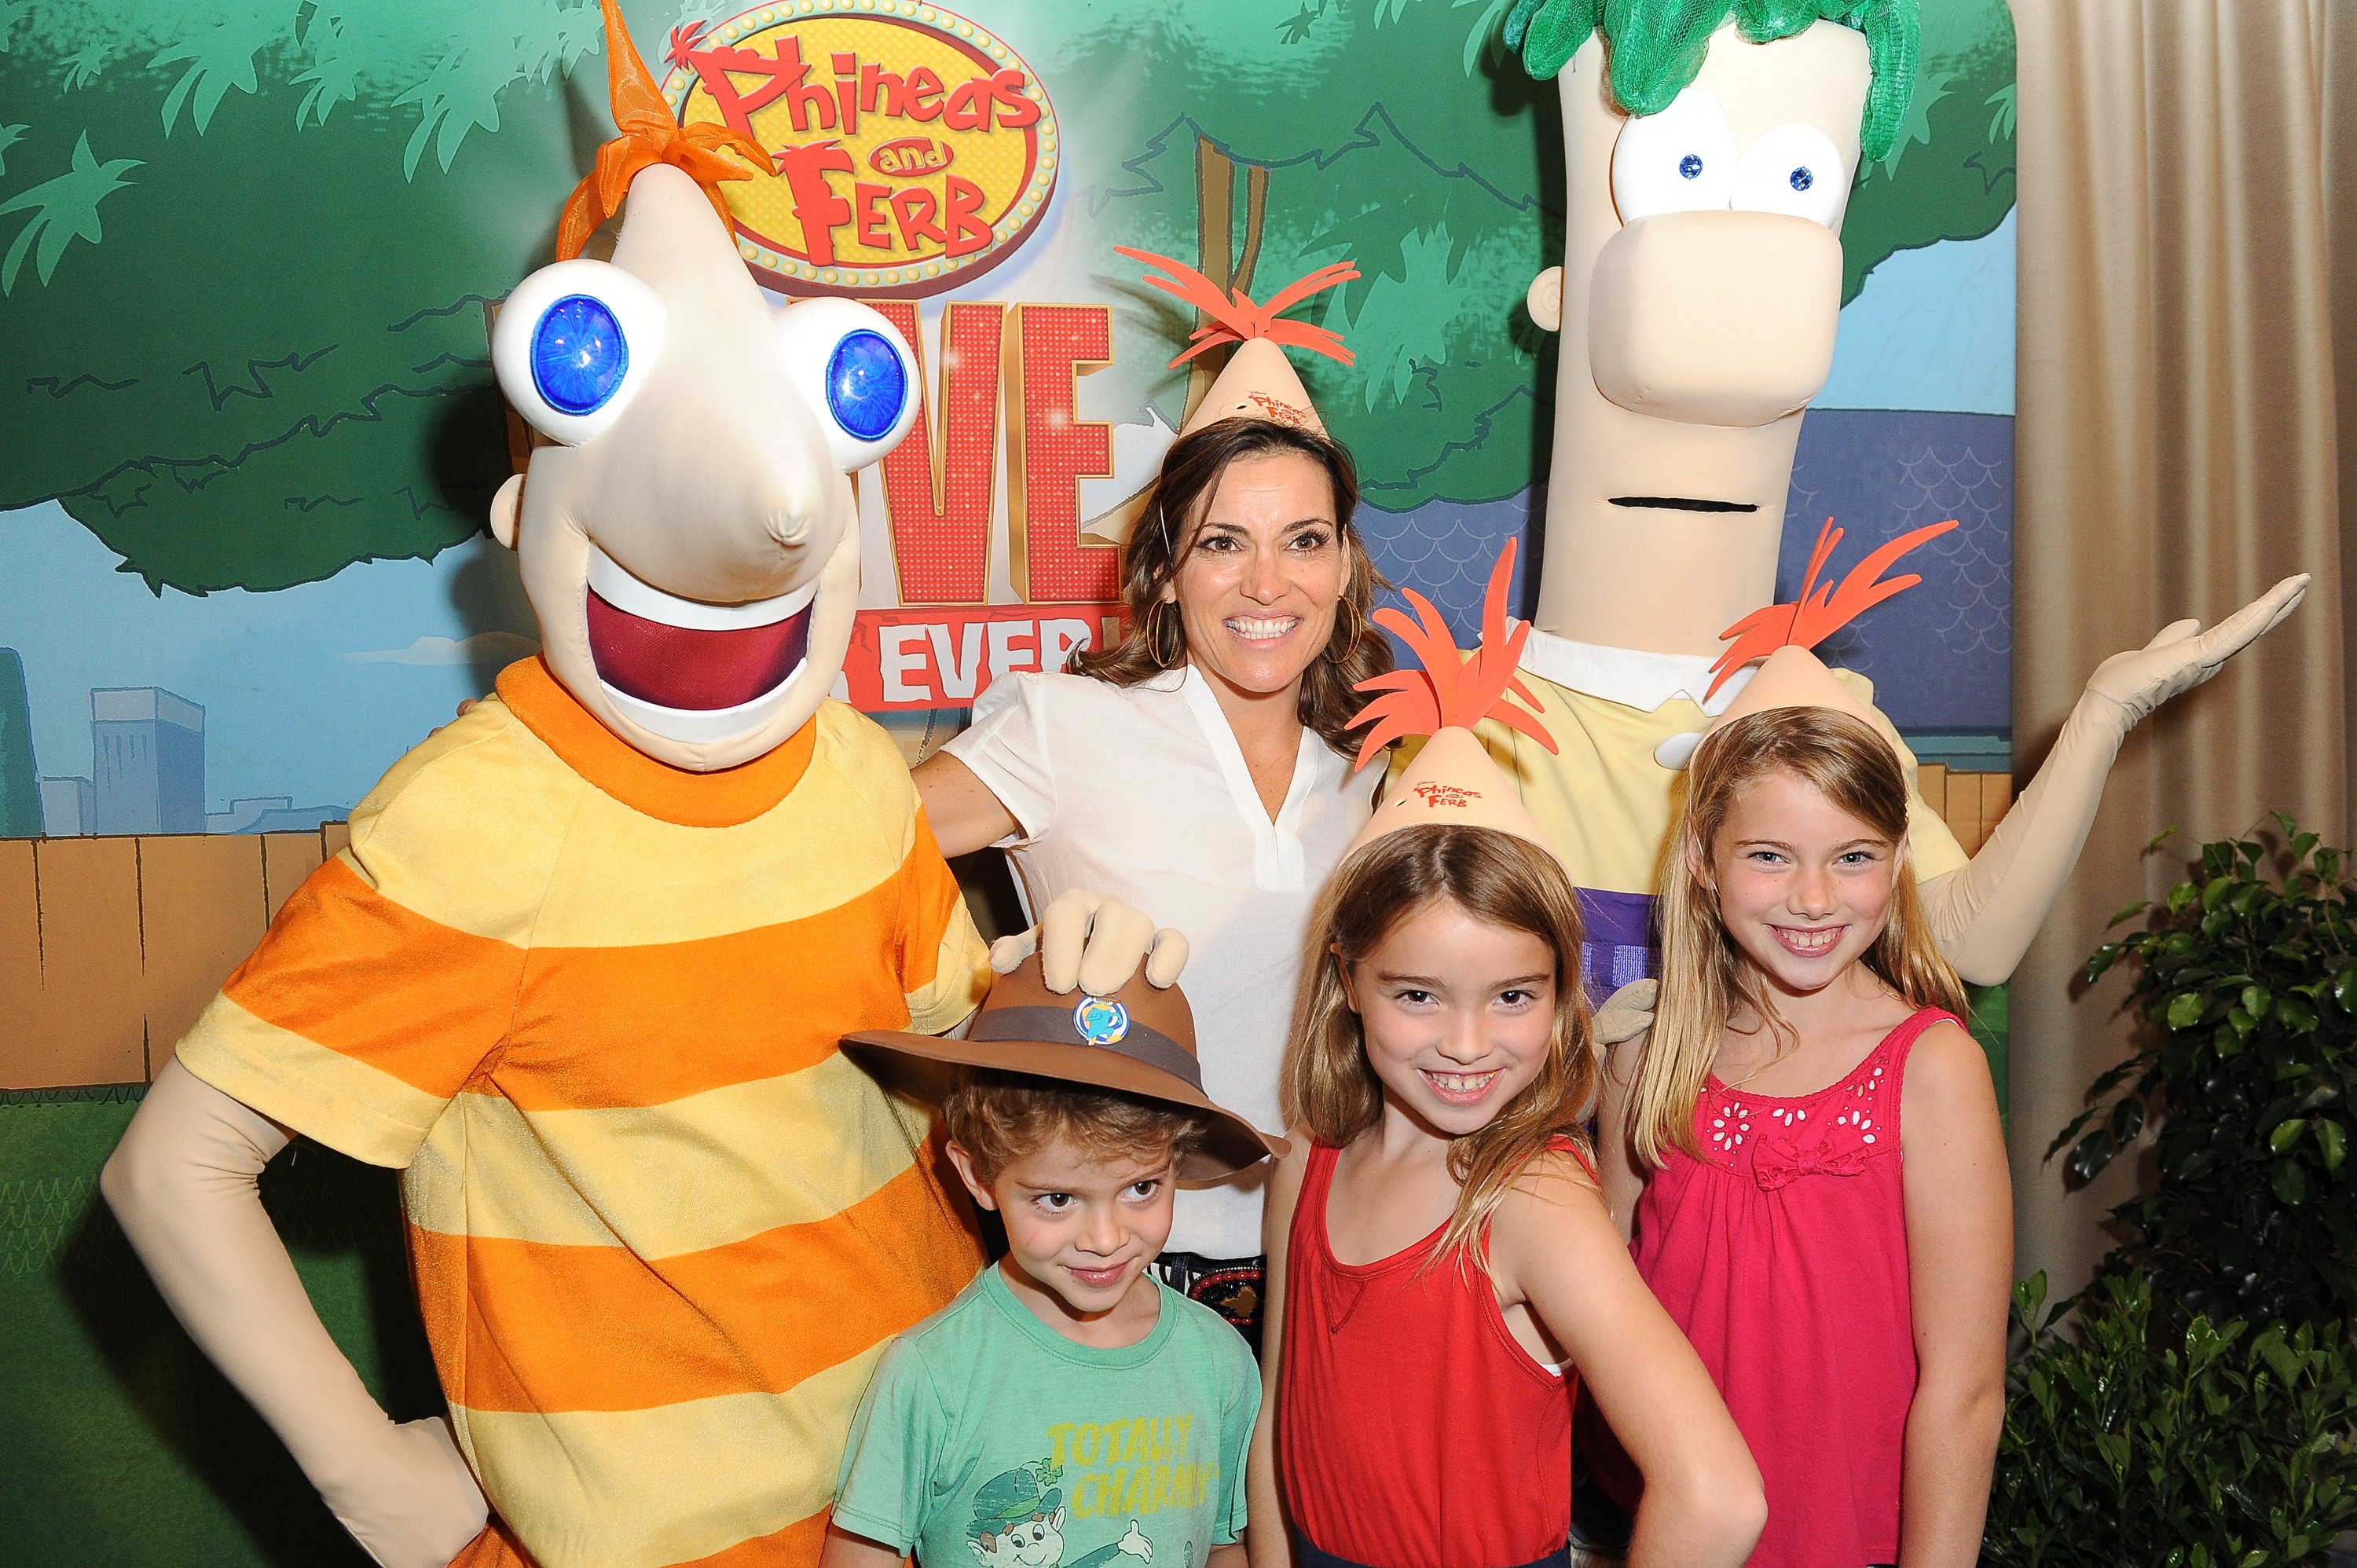 Kit Hoover at a "Phineas and Ferb" special event with her children in 2012, in Los Angeles, California. | Source: Getty Images